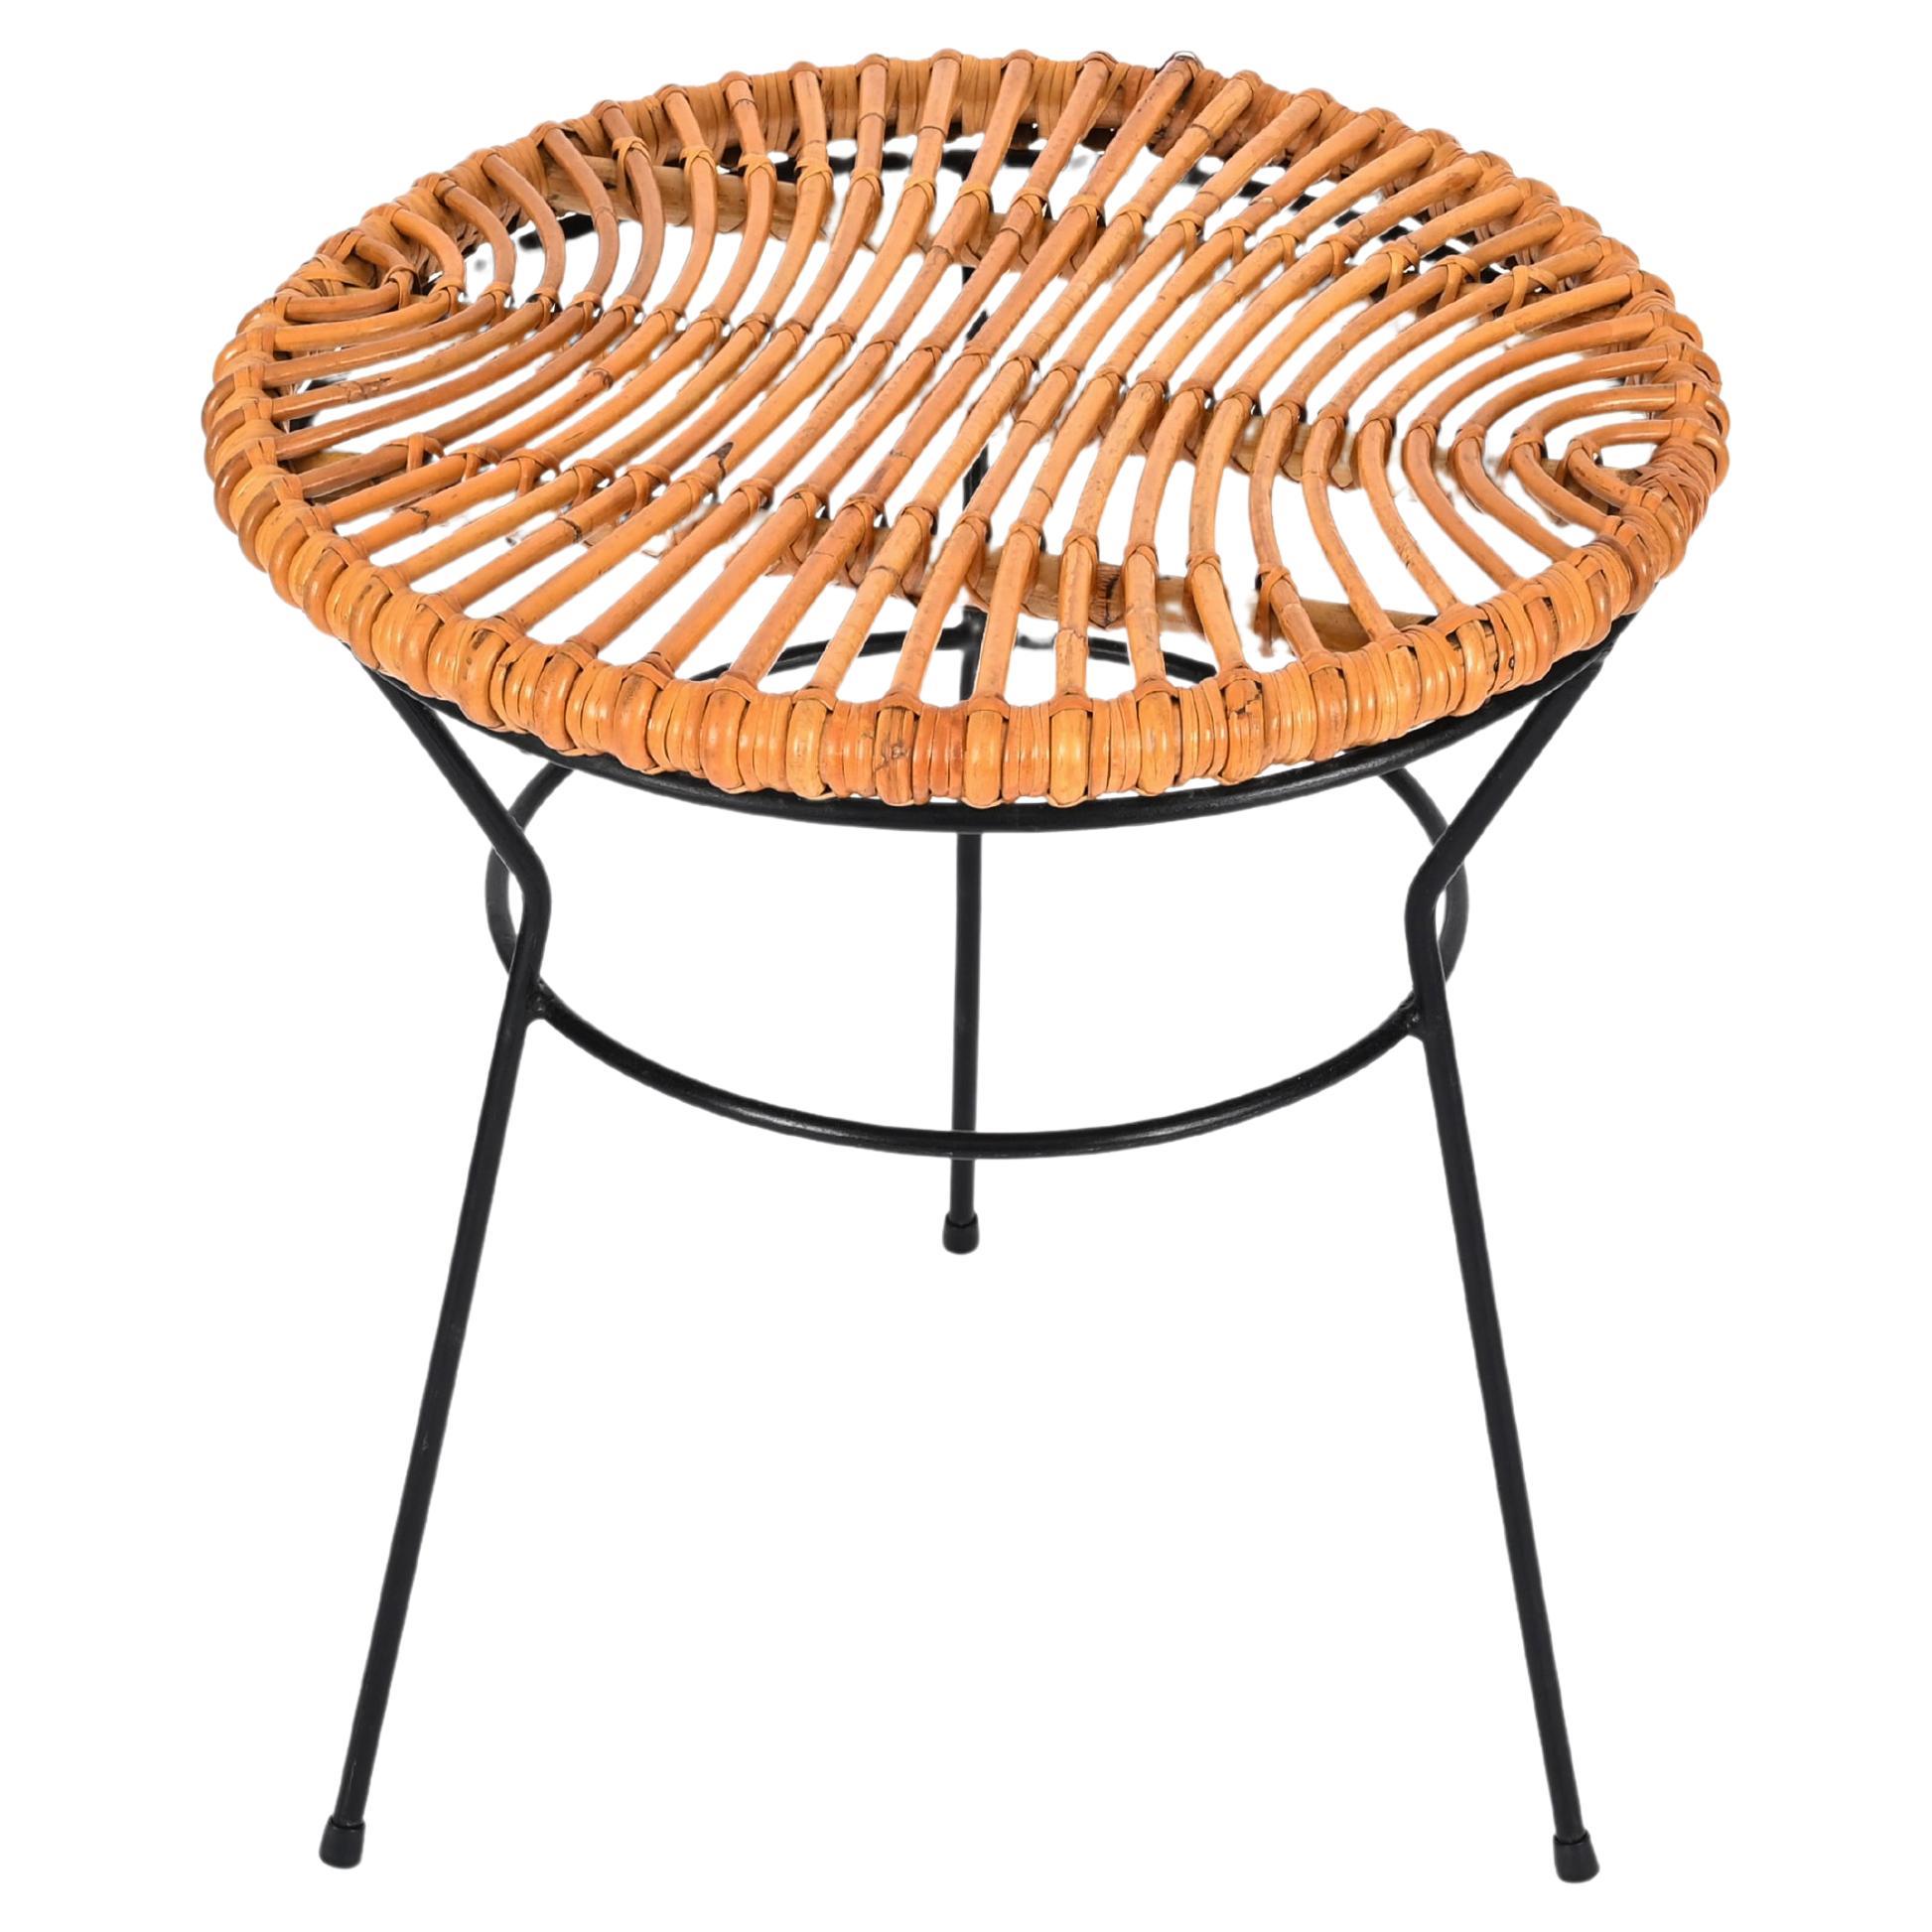 French Riviera Rattan, Wicker and Iron Coffee Table, Roberto Mango, Italy 1960s For Sale